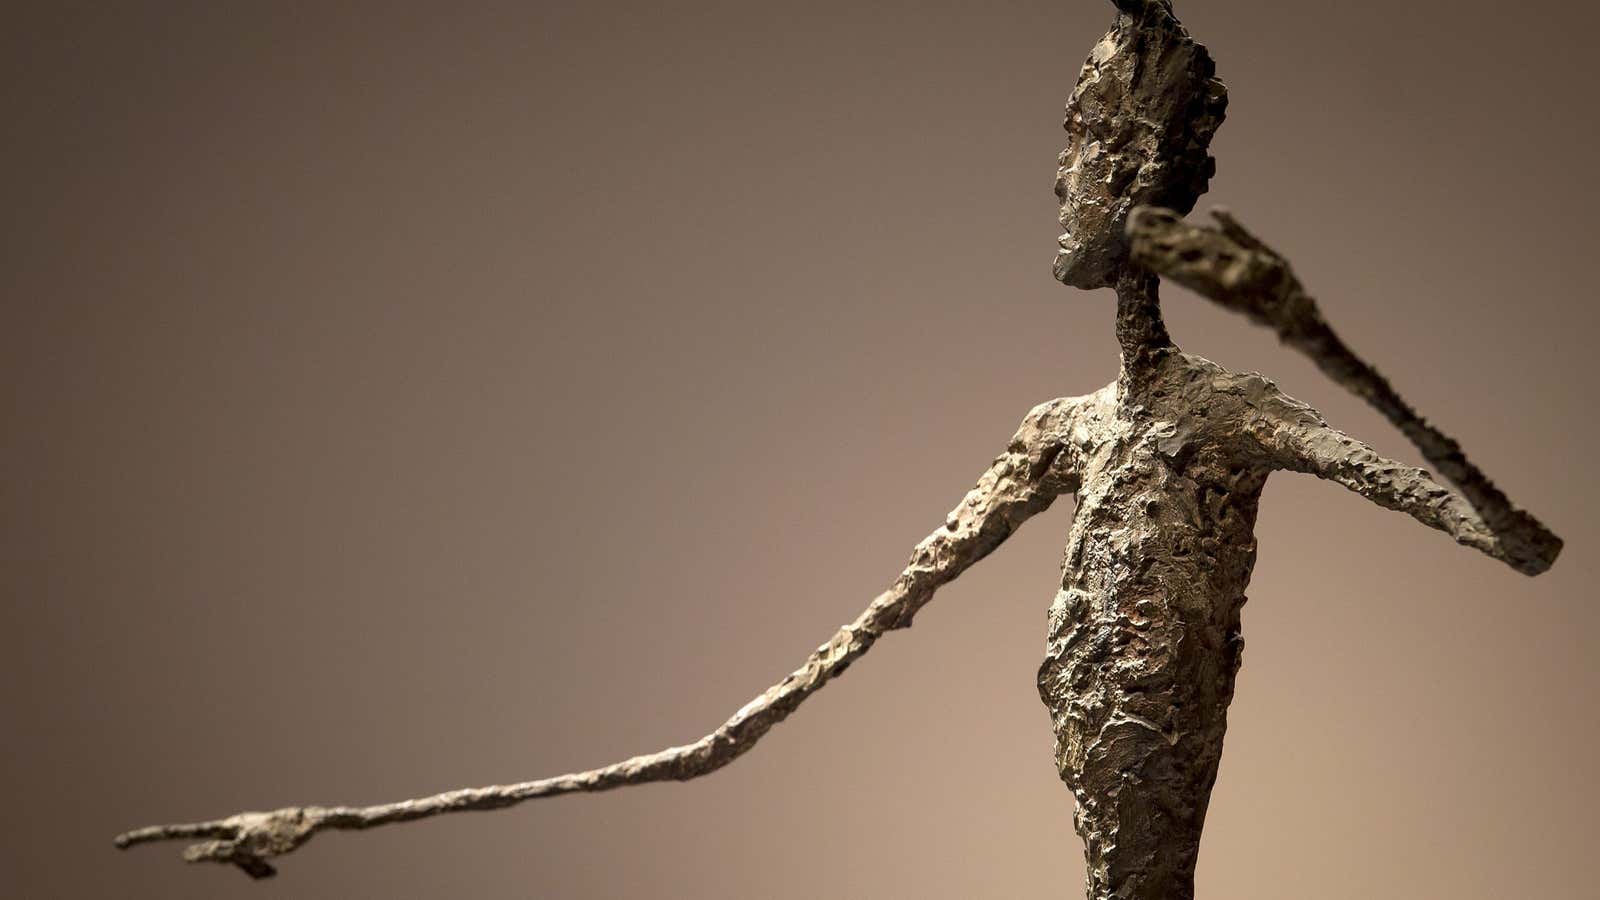 Alberto Giacometti’s sculpture “L’homme Au Doigt” (Pointing man).